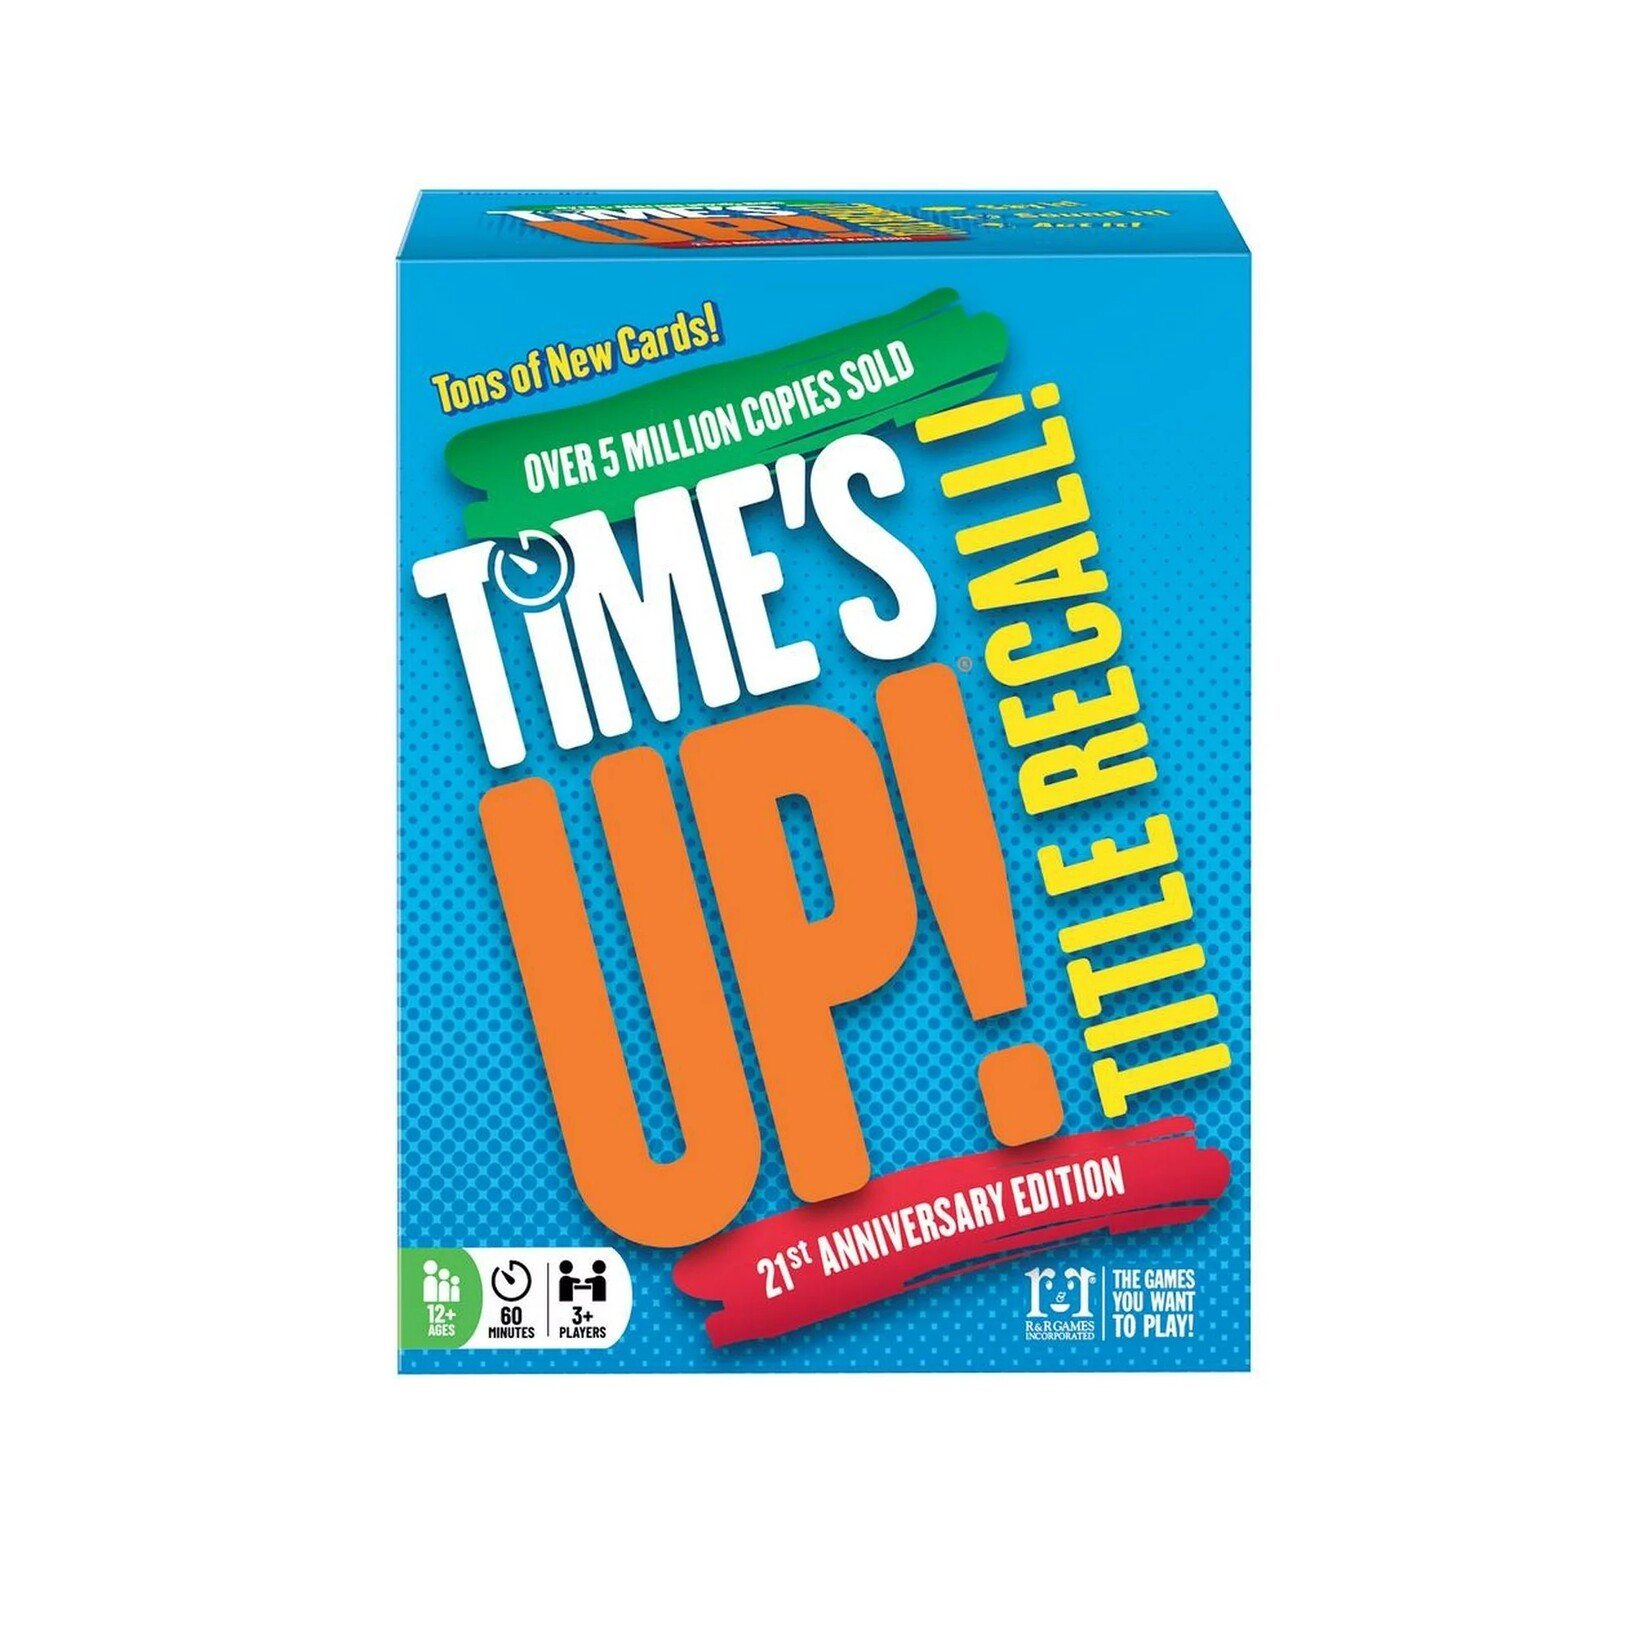 R&R Games Time's Up! Title Recall